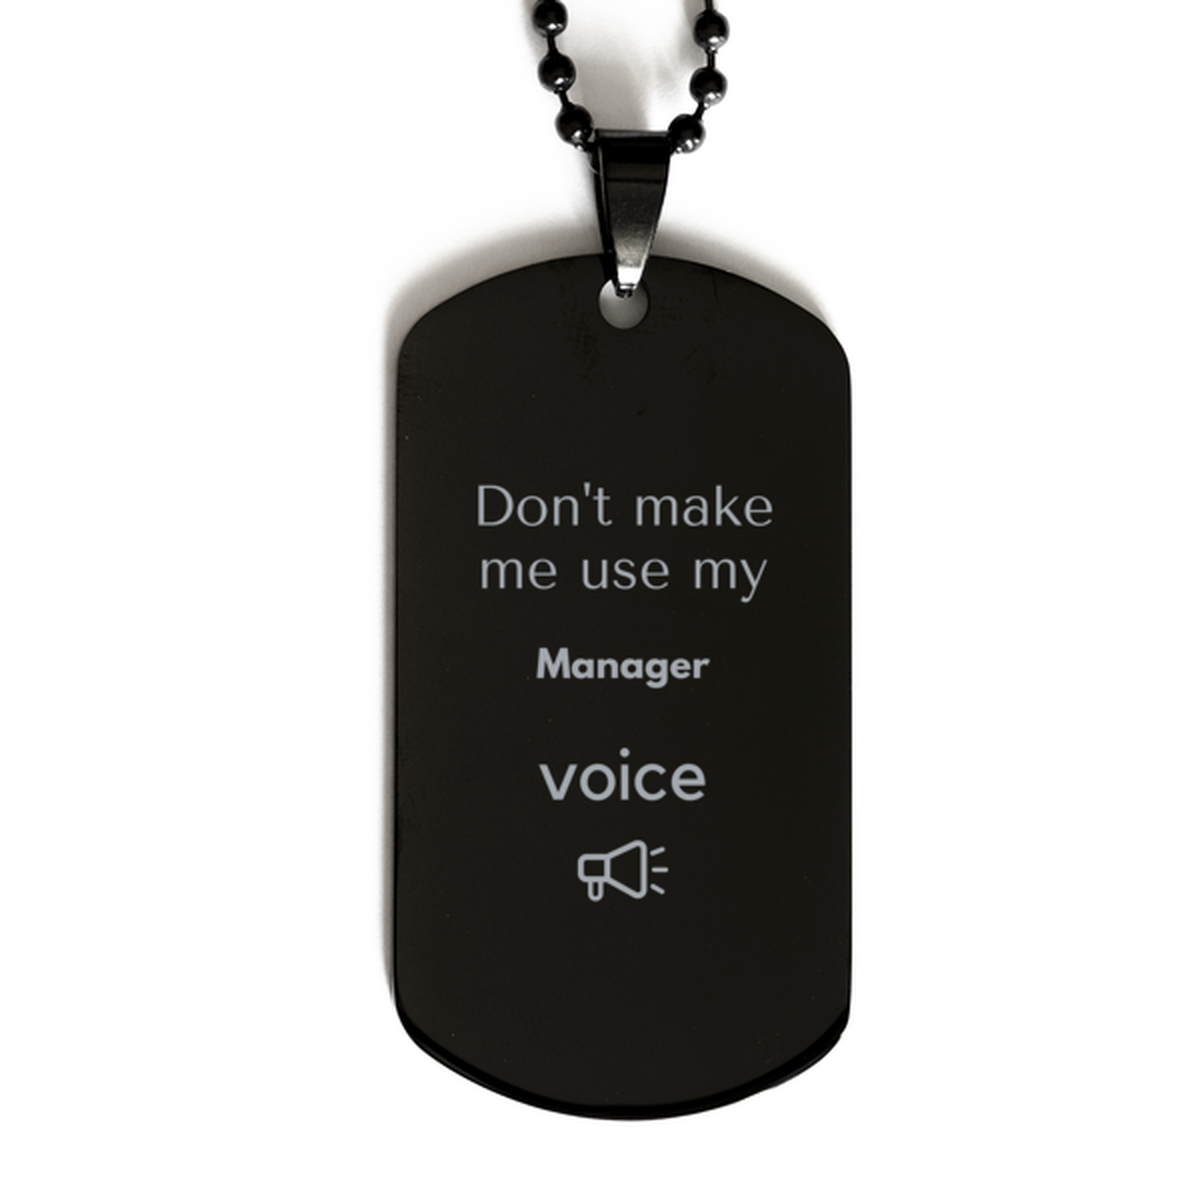 Don't make me use my Manager voice, Sarcasm Manager Gifts, Christmas Manager Black Dog Tag Birthday Unique Gifts For Manager Coworkers, Men, Women, Colleague, Friends